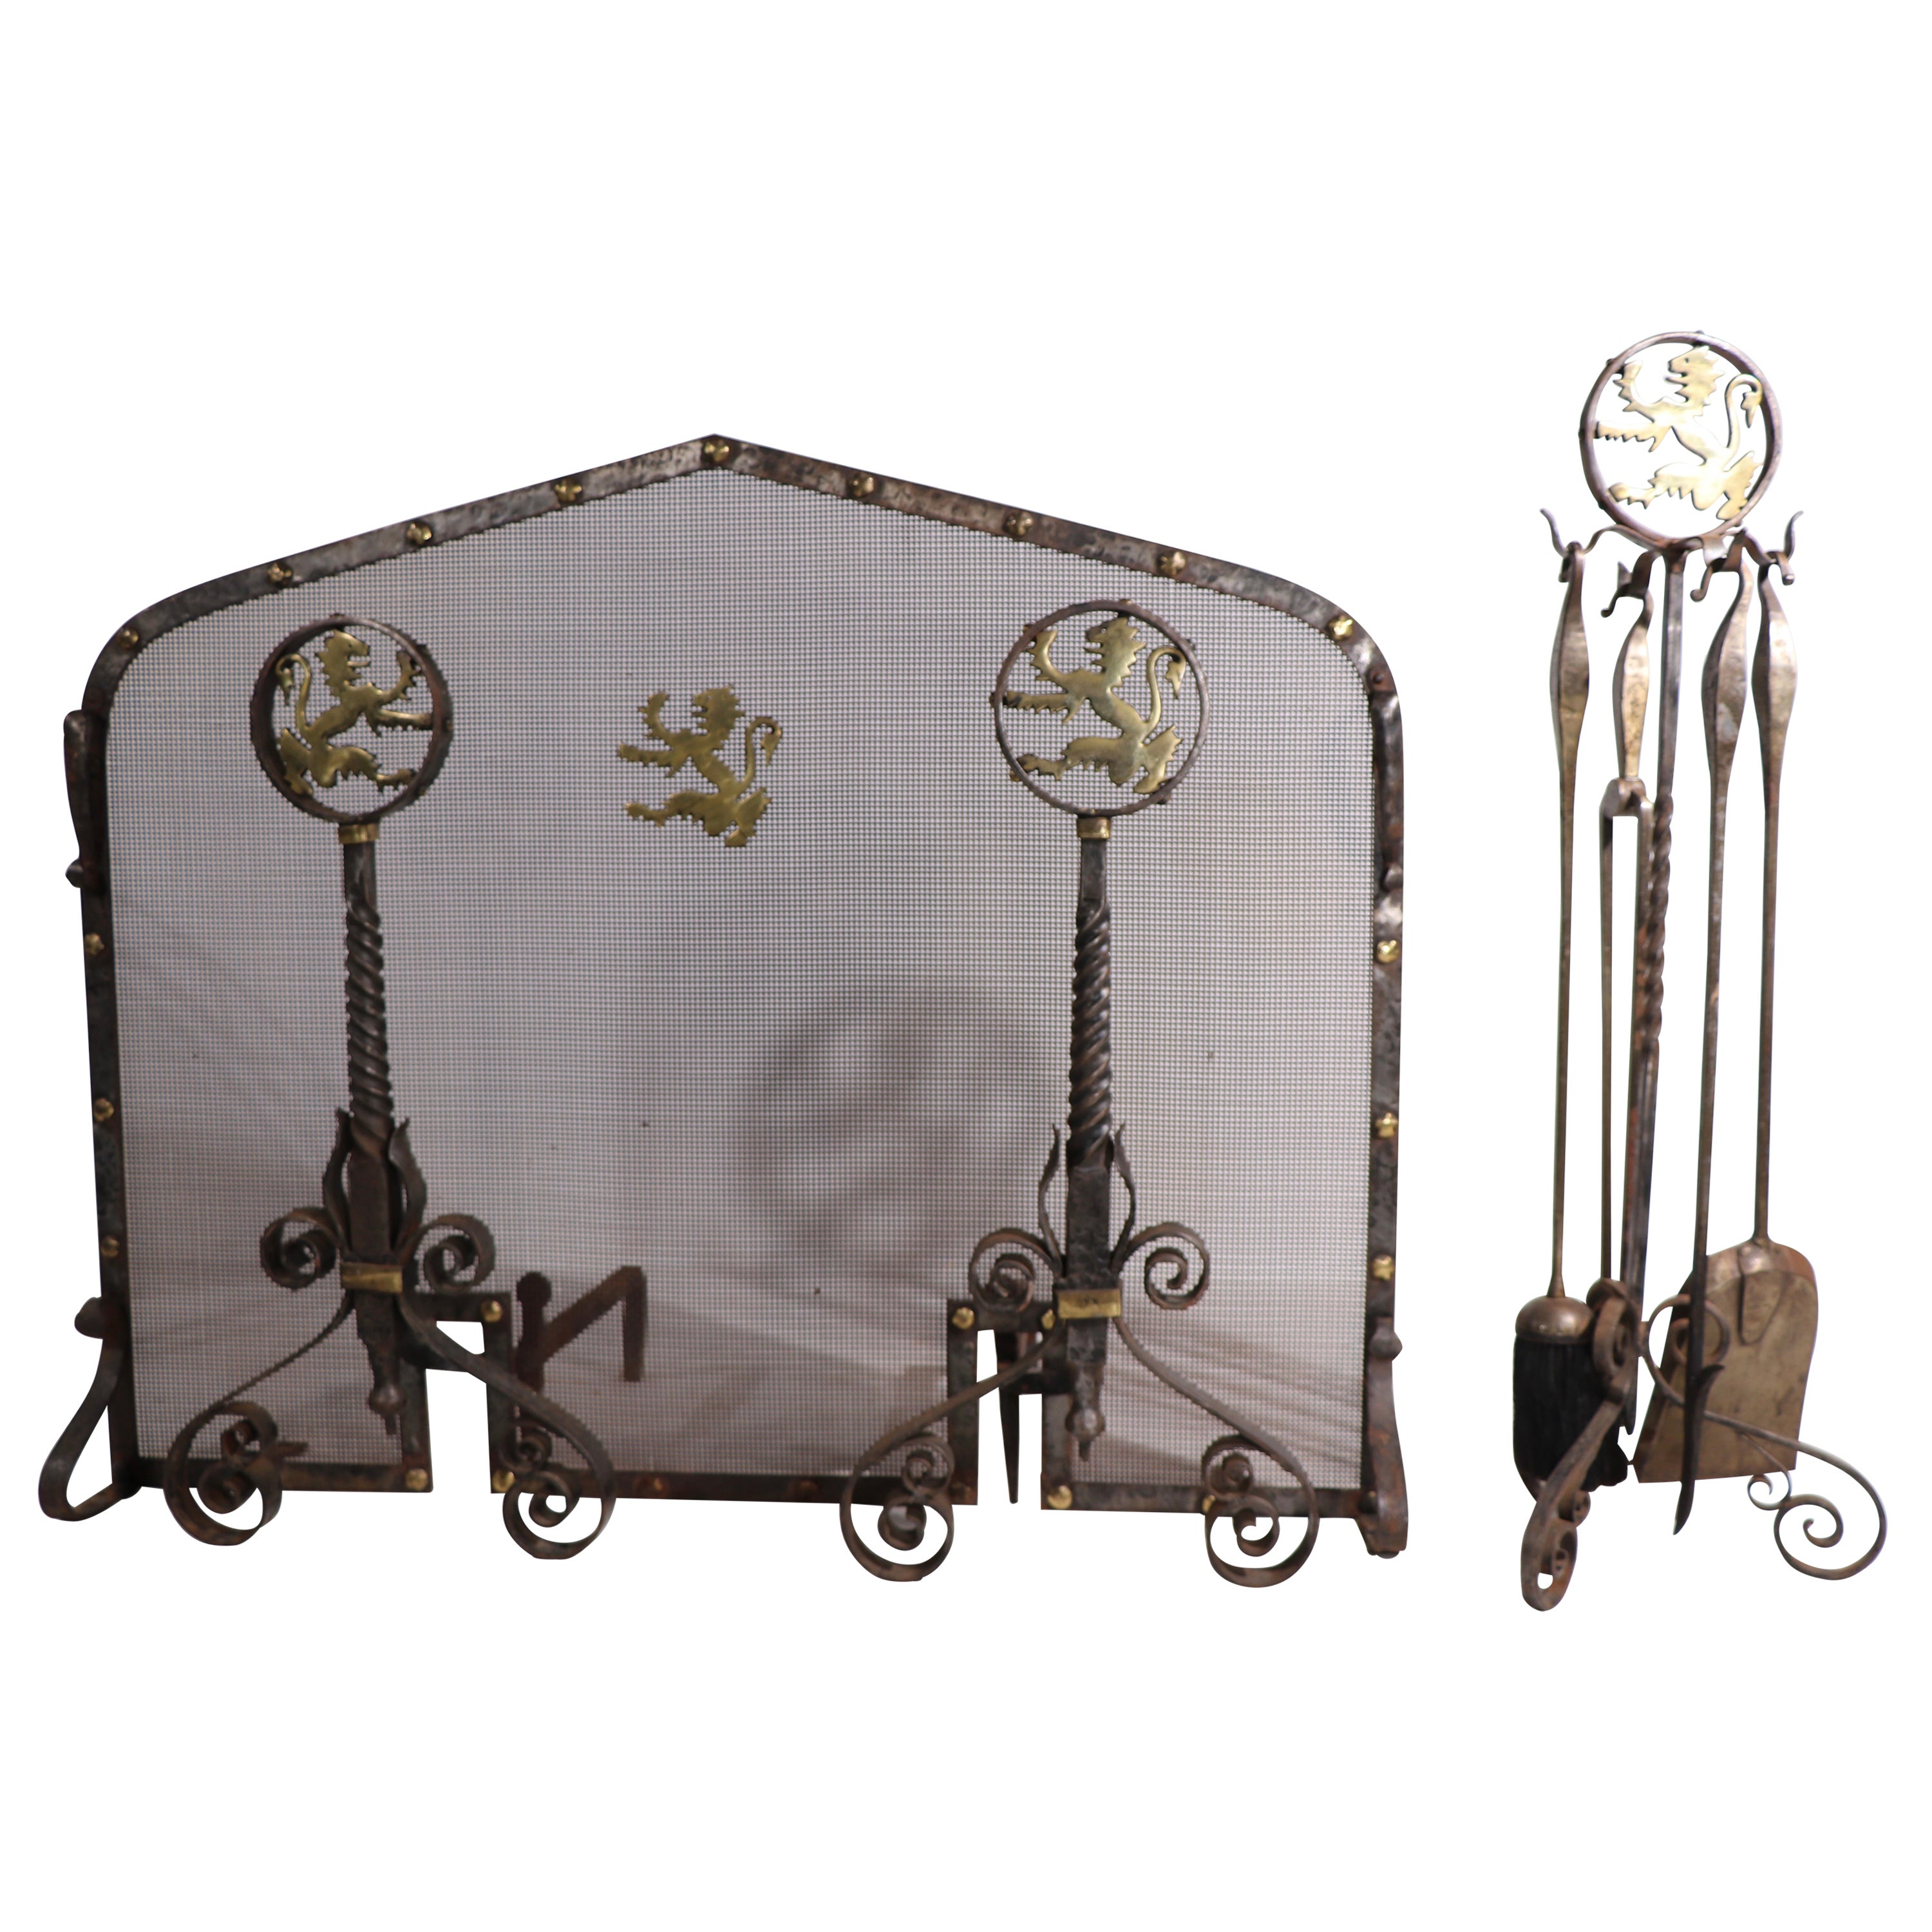 Complete Fireplace Set Inc, Andirons Screen and Tools